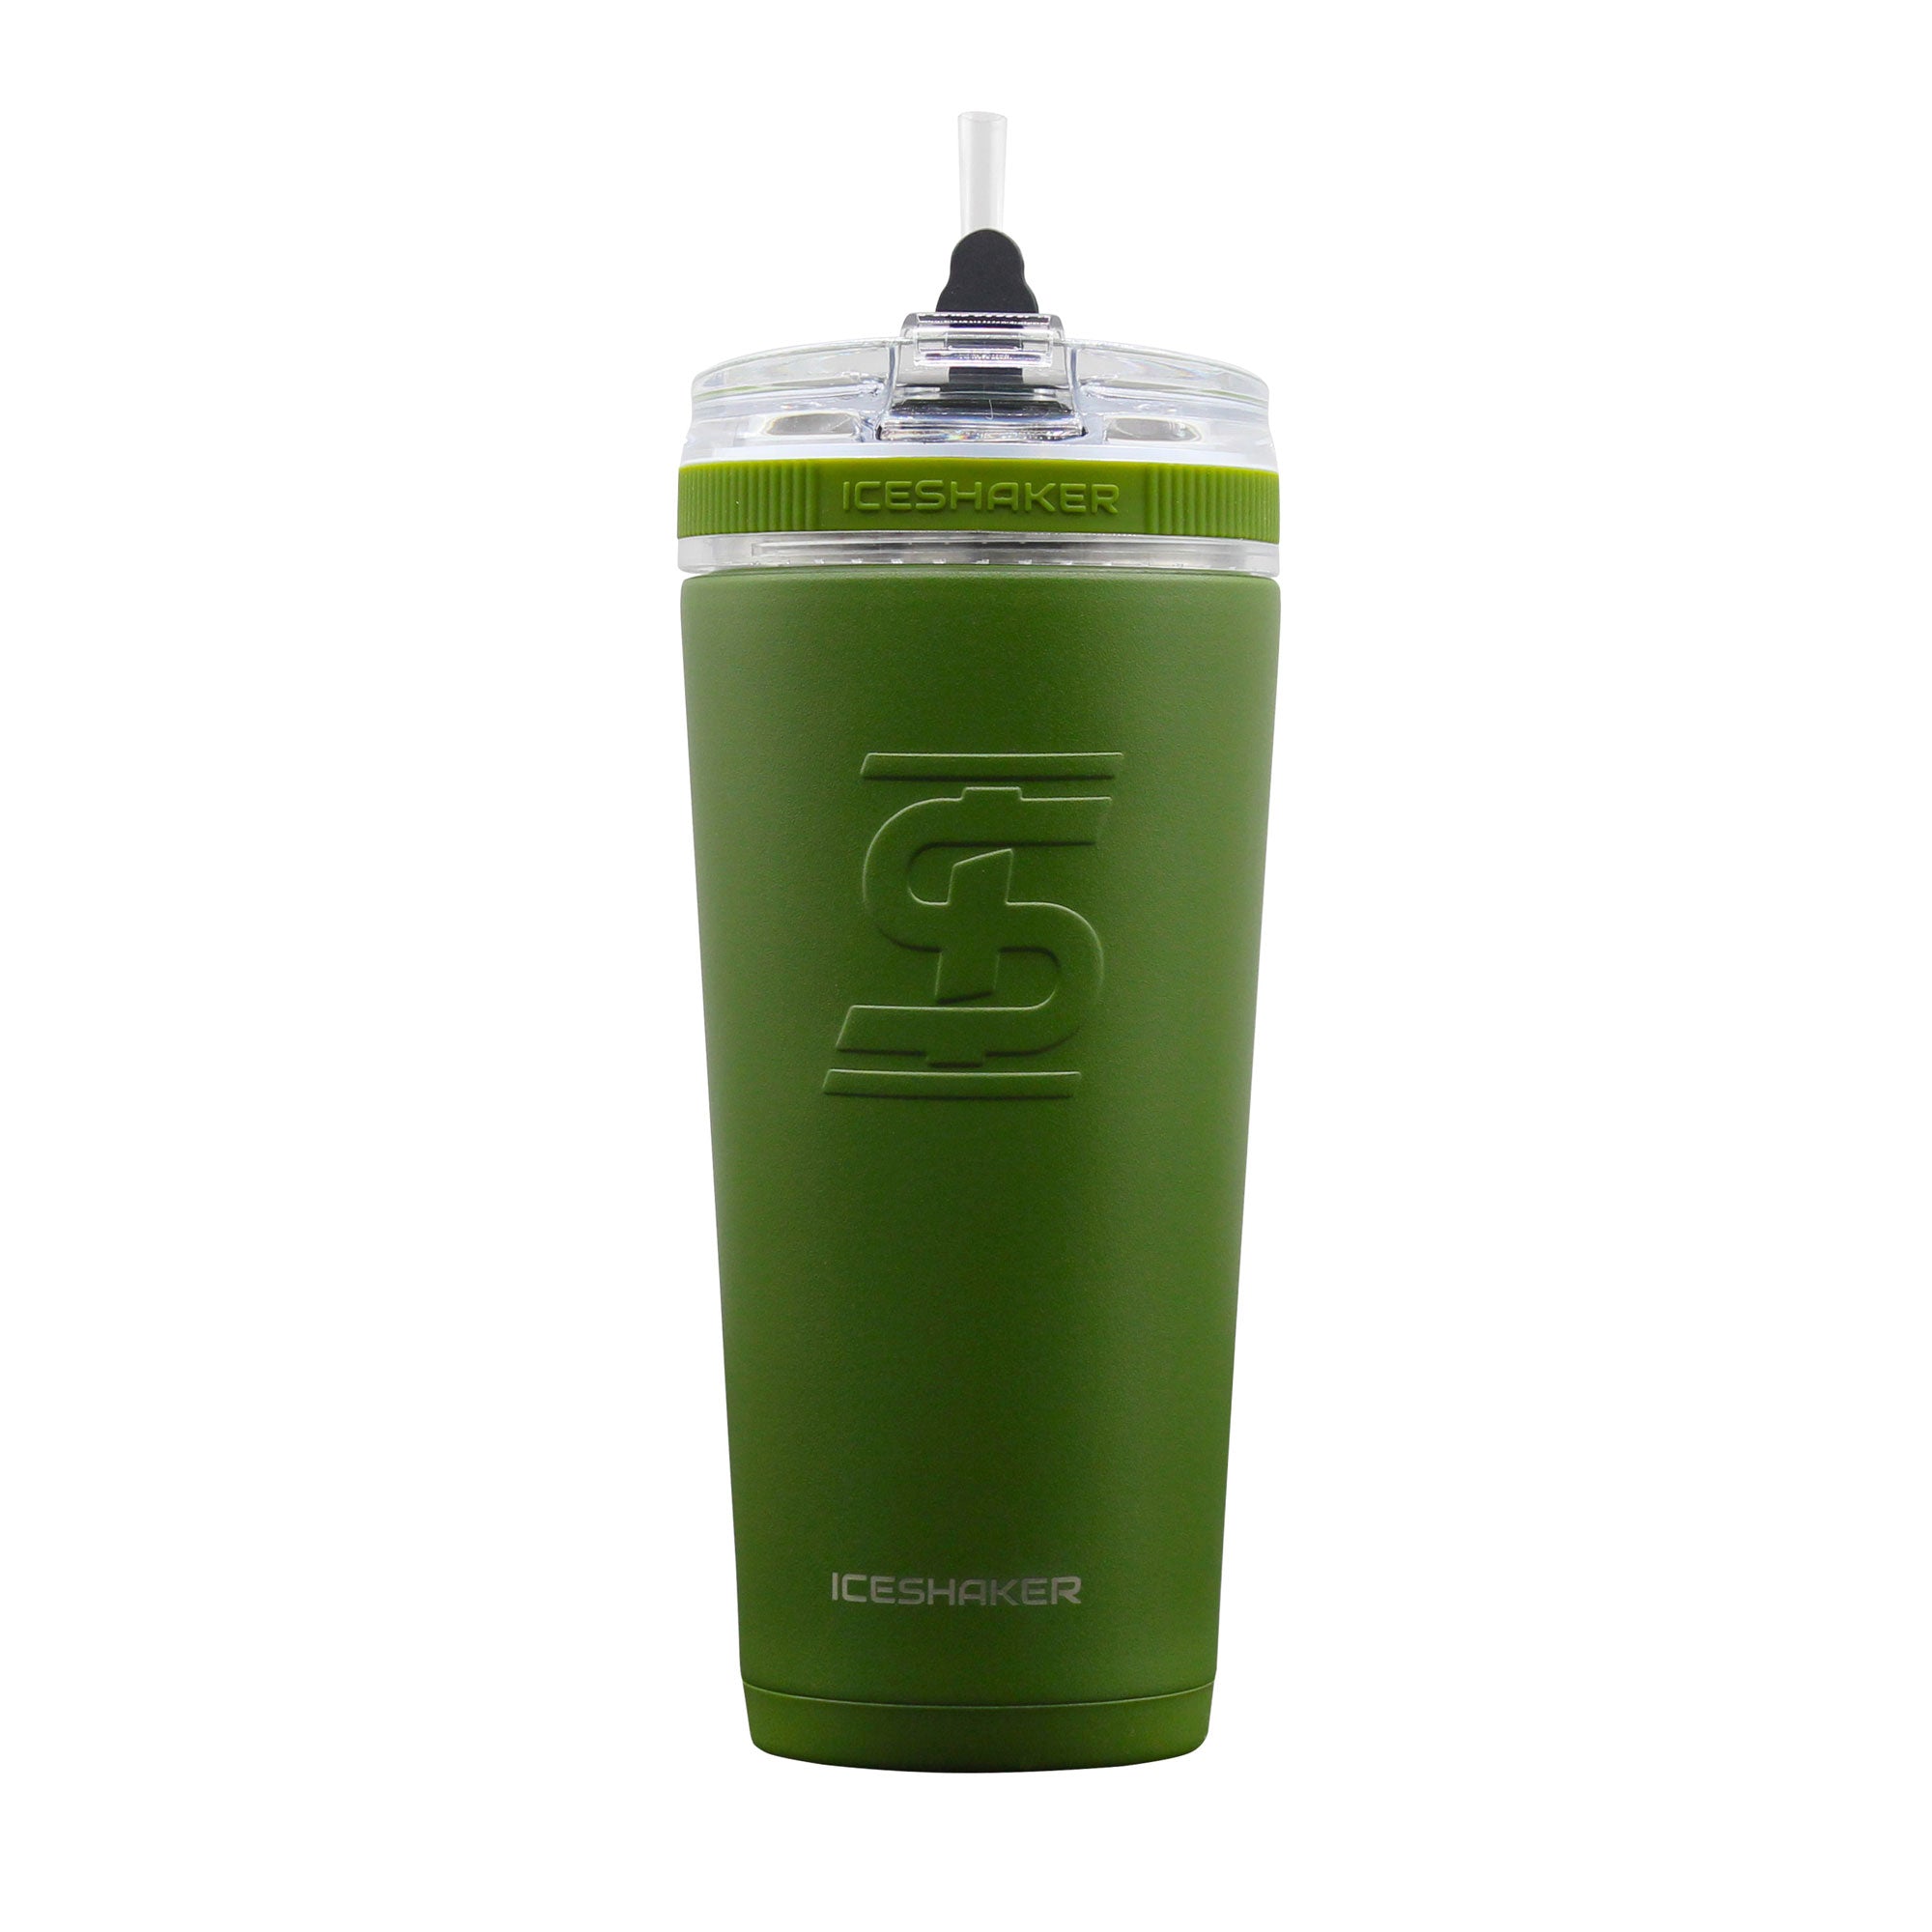 NEW Clear Shaker Metal Bottle, 16 oz/450 ml, Athletic Greens brand